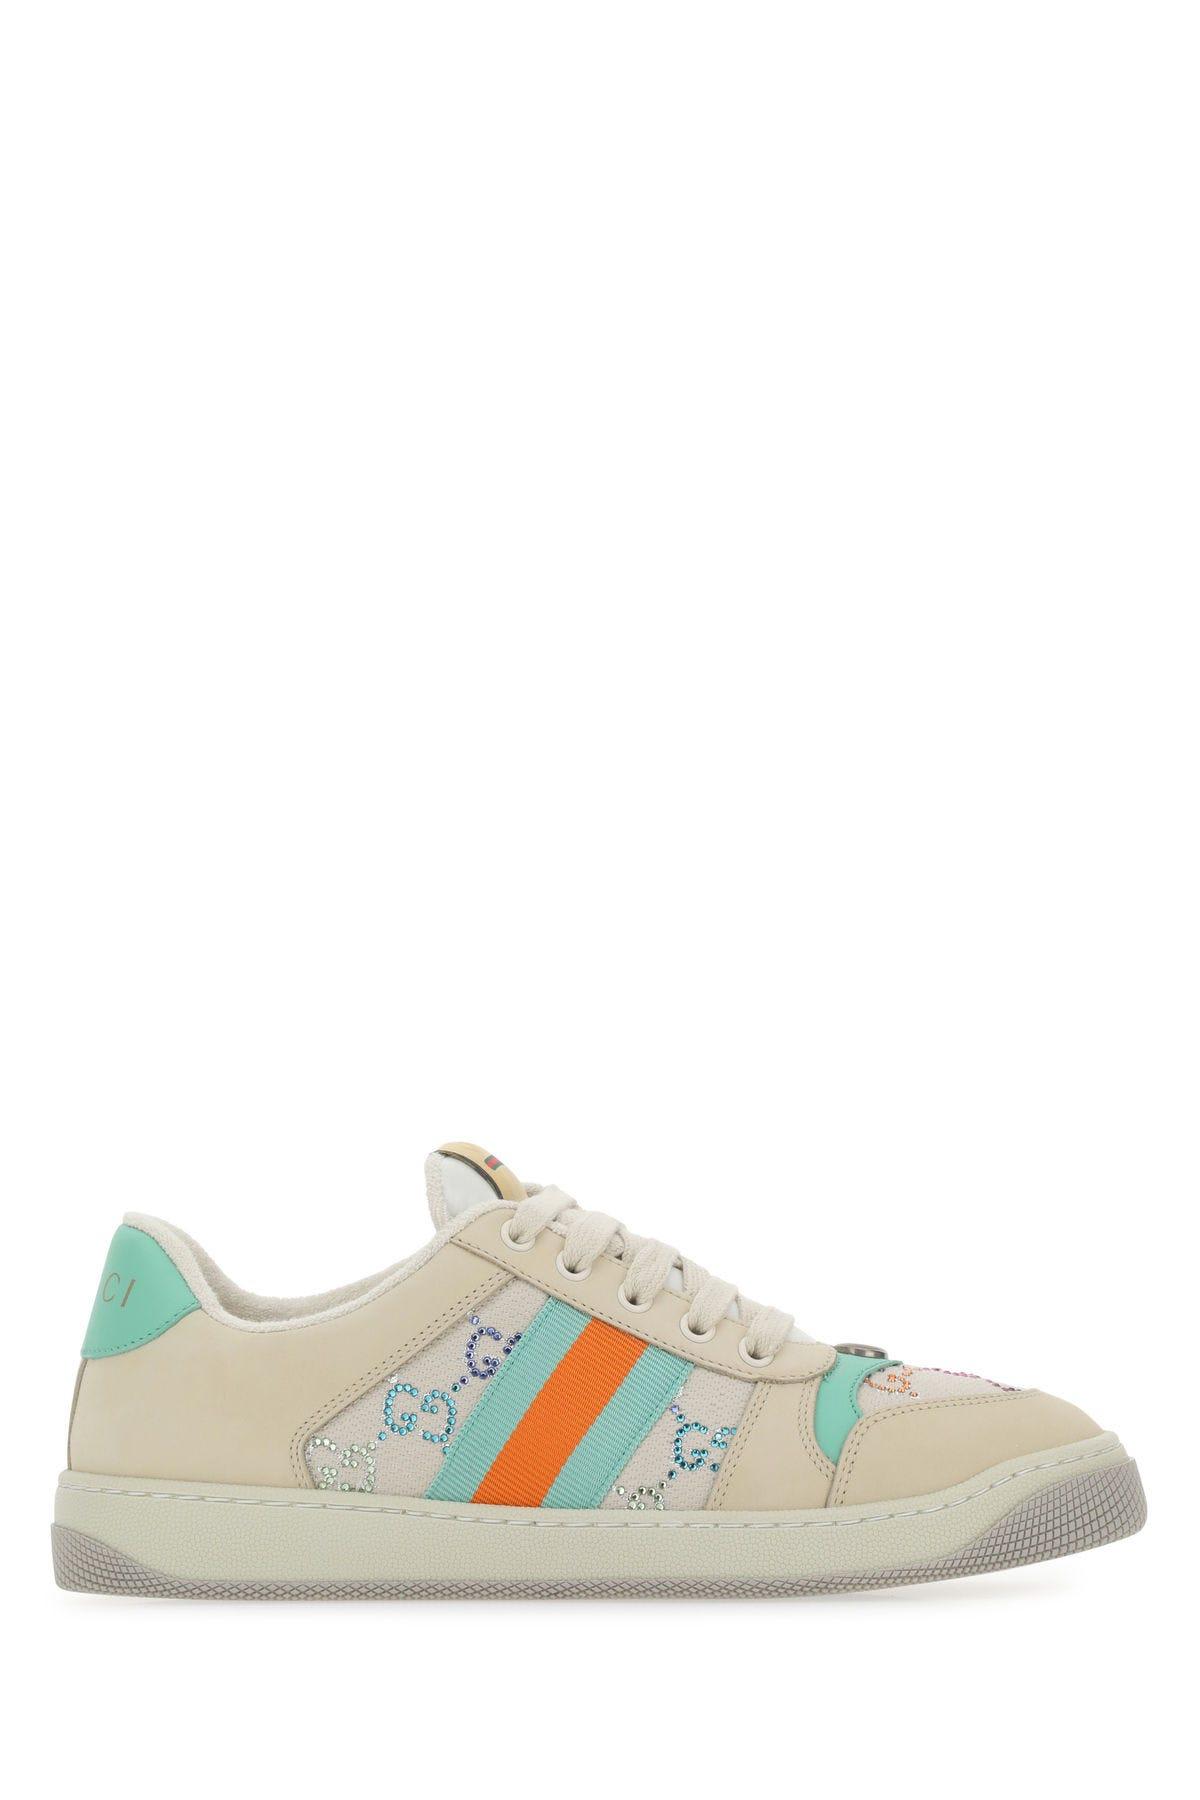 Gucci Multicolor Suede And Fabric Screener Sneakers